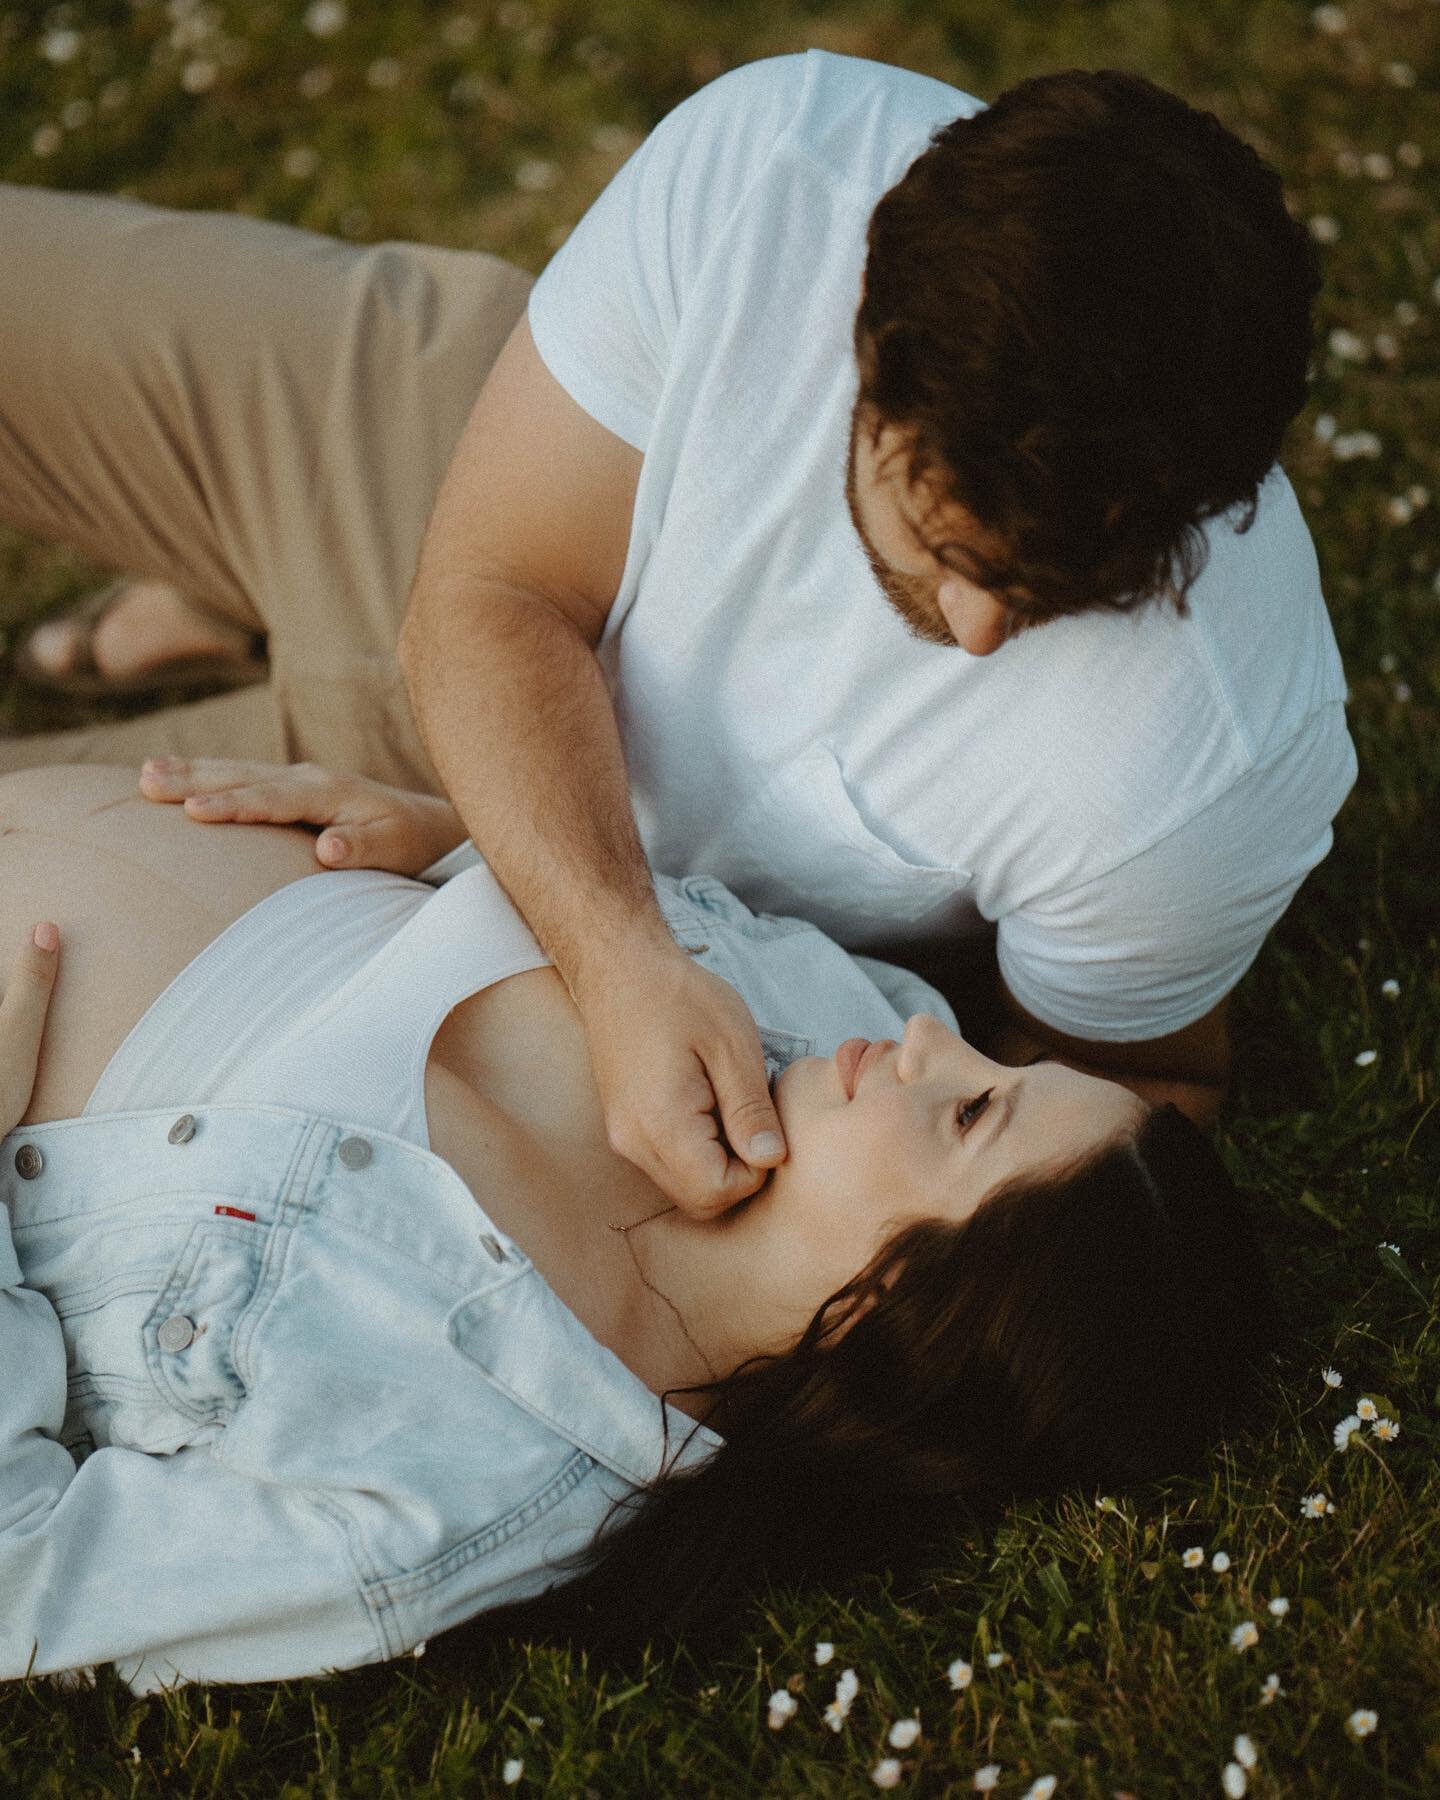 The absolute sweetest lil maternity session with these too before their sweet girl arrives ❤️